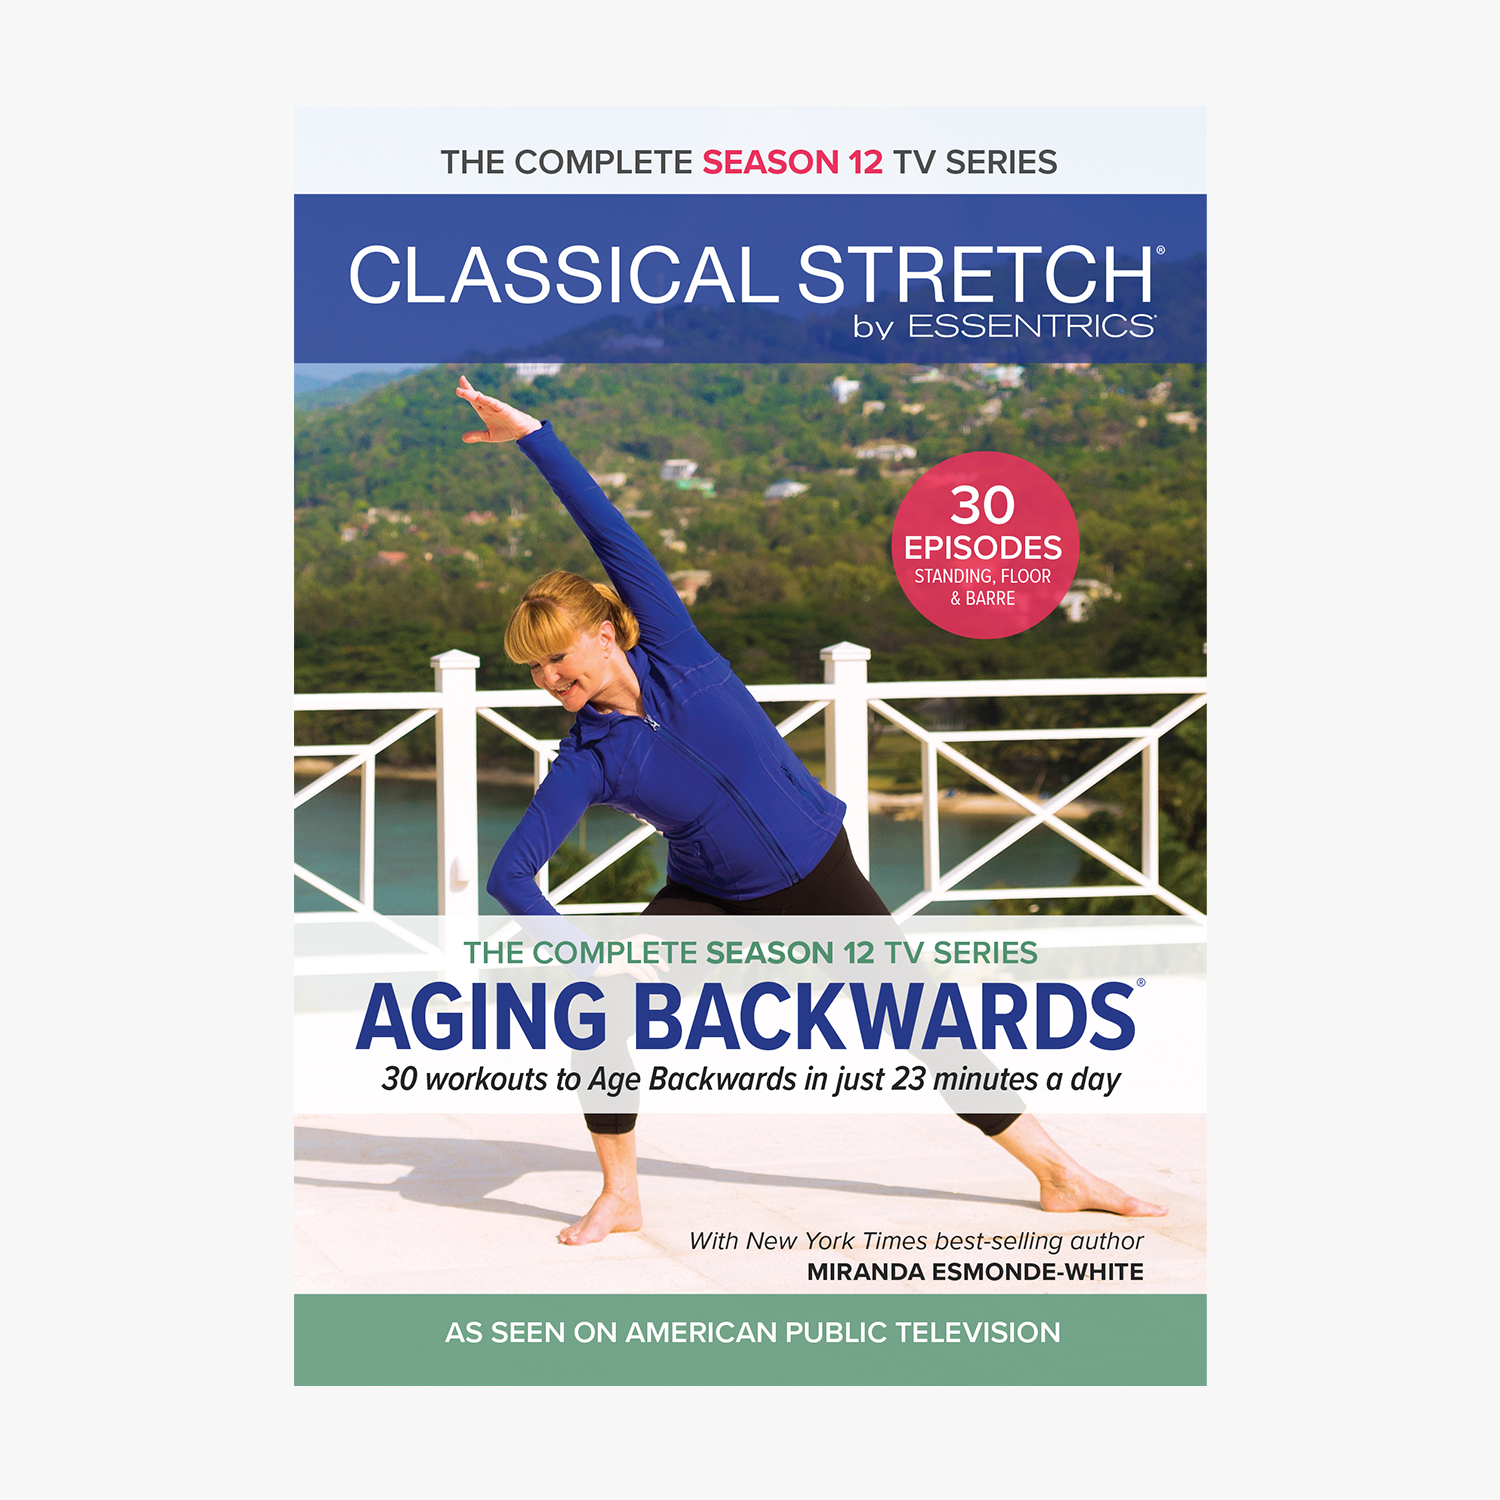 Enjoy 30 full body episodes from the Classical Stretch TV show to age backw...